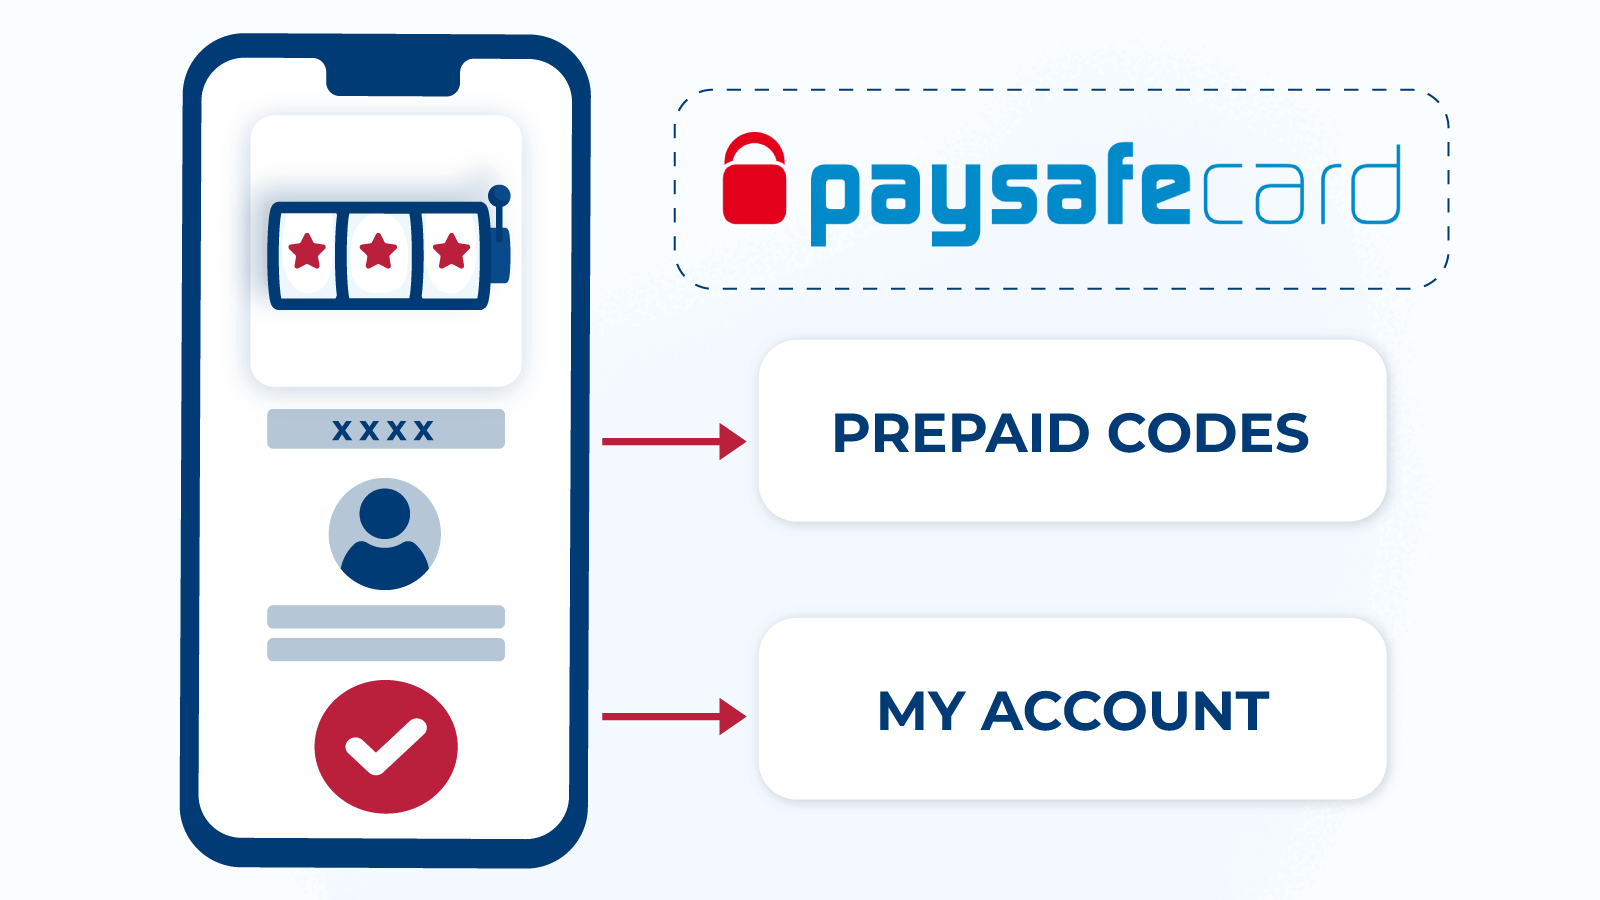 How to Use Paysafecard in Online Casinos